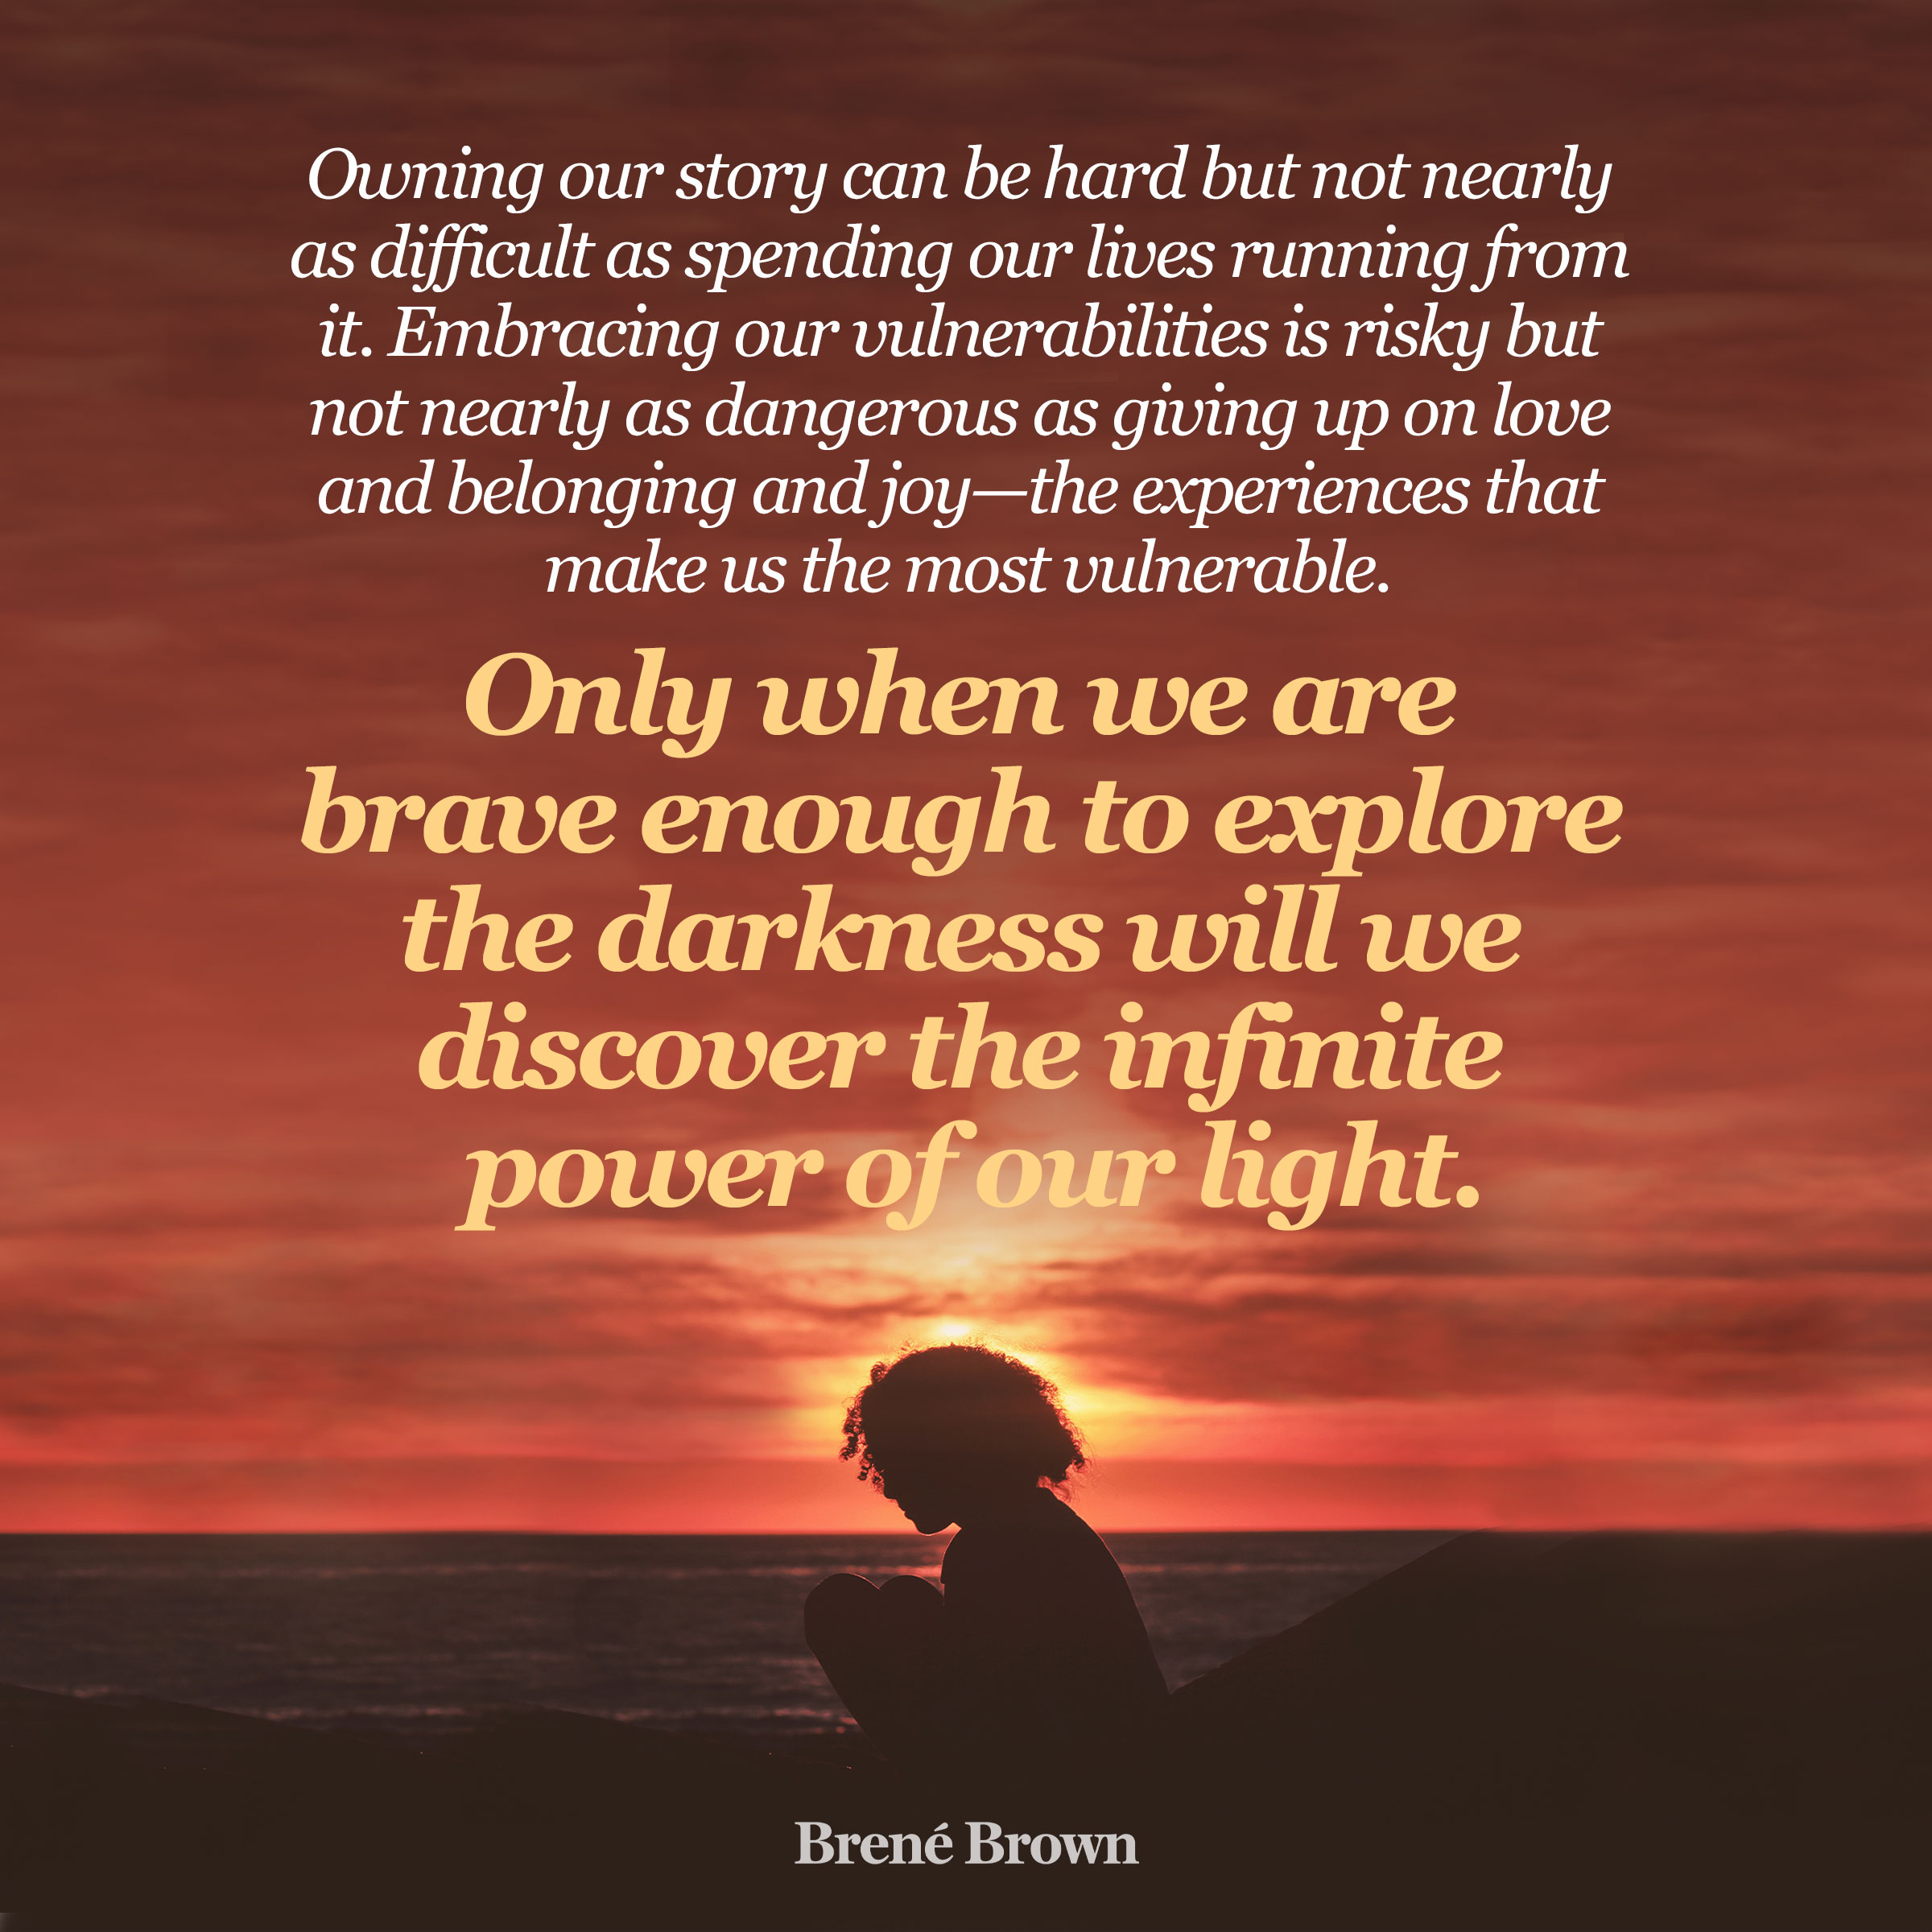 Owning our story can be hard but not nearly as difficult as spending our lives running from it. Embracing our vulnerabilities is risky but not nearly as dangerous as giving up on love and belonging and joy - the experiences that make us the most vulnerable.  Only when we are brave enough to explore the darkness will we discover the infinite power of our light.